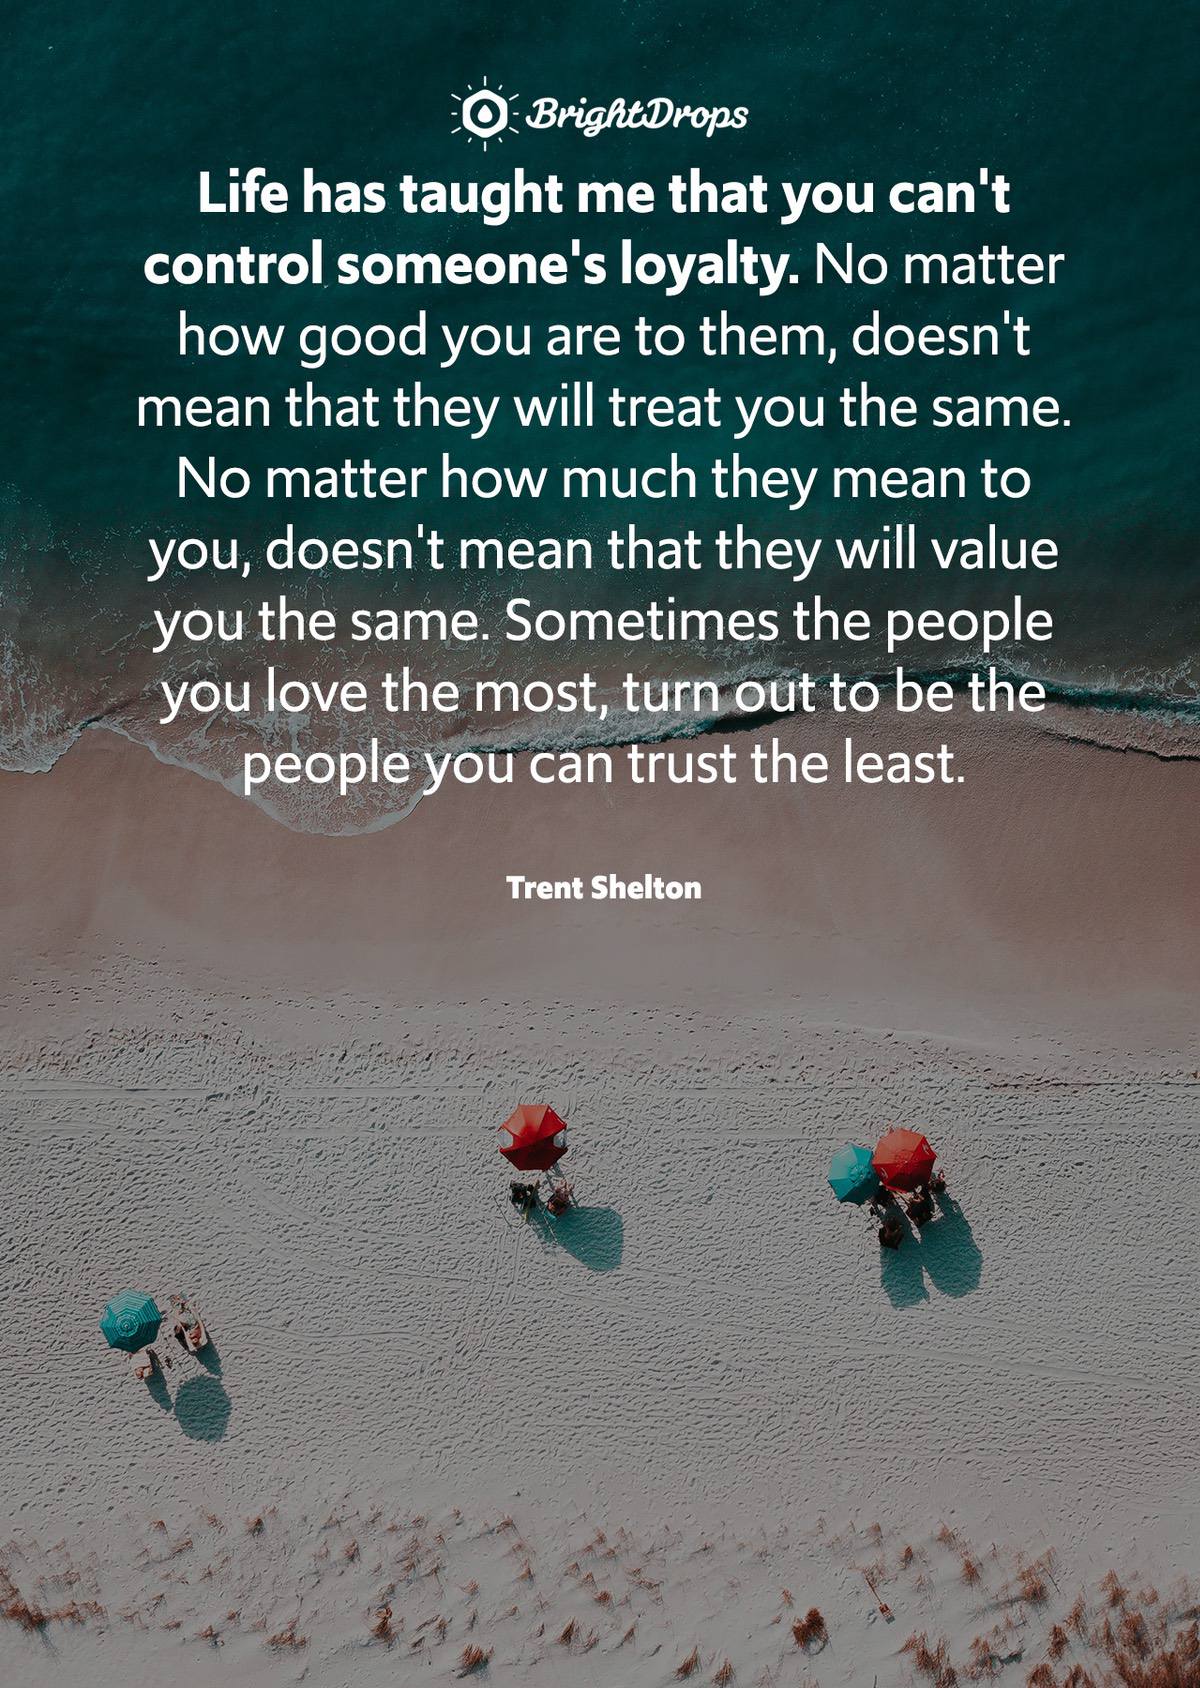 Life has taught me that you can't control someone's loyalty. No matter how good you are to them, doesn't mean that they will treat you the same. No matter how much they mean to you, doesn't mean that they will value you the same. Sometimes the people you love the most, turn out to be the  people you can trust the least. - Trent Shelton